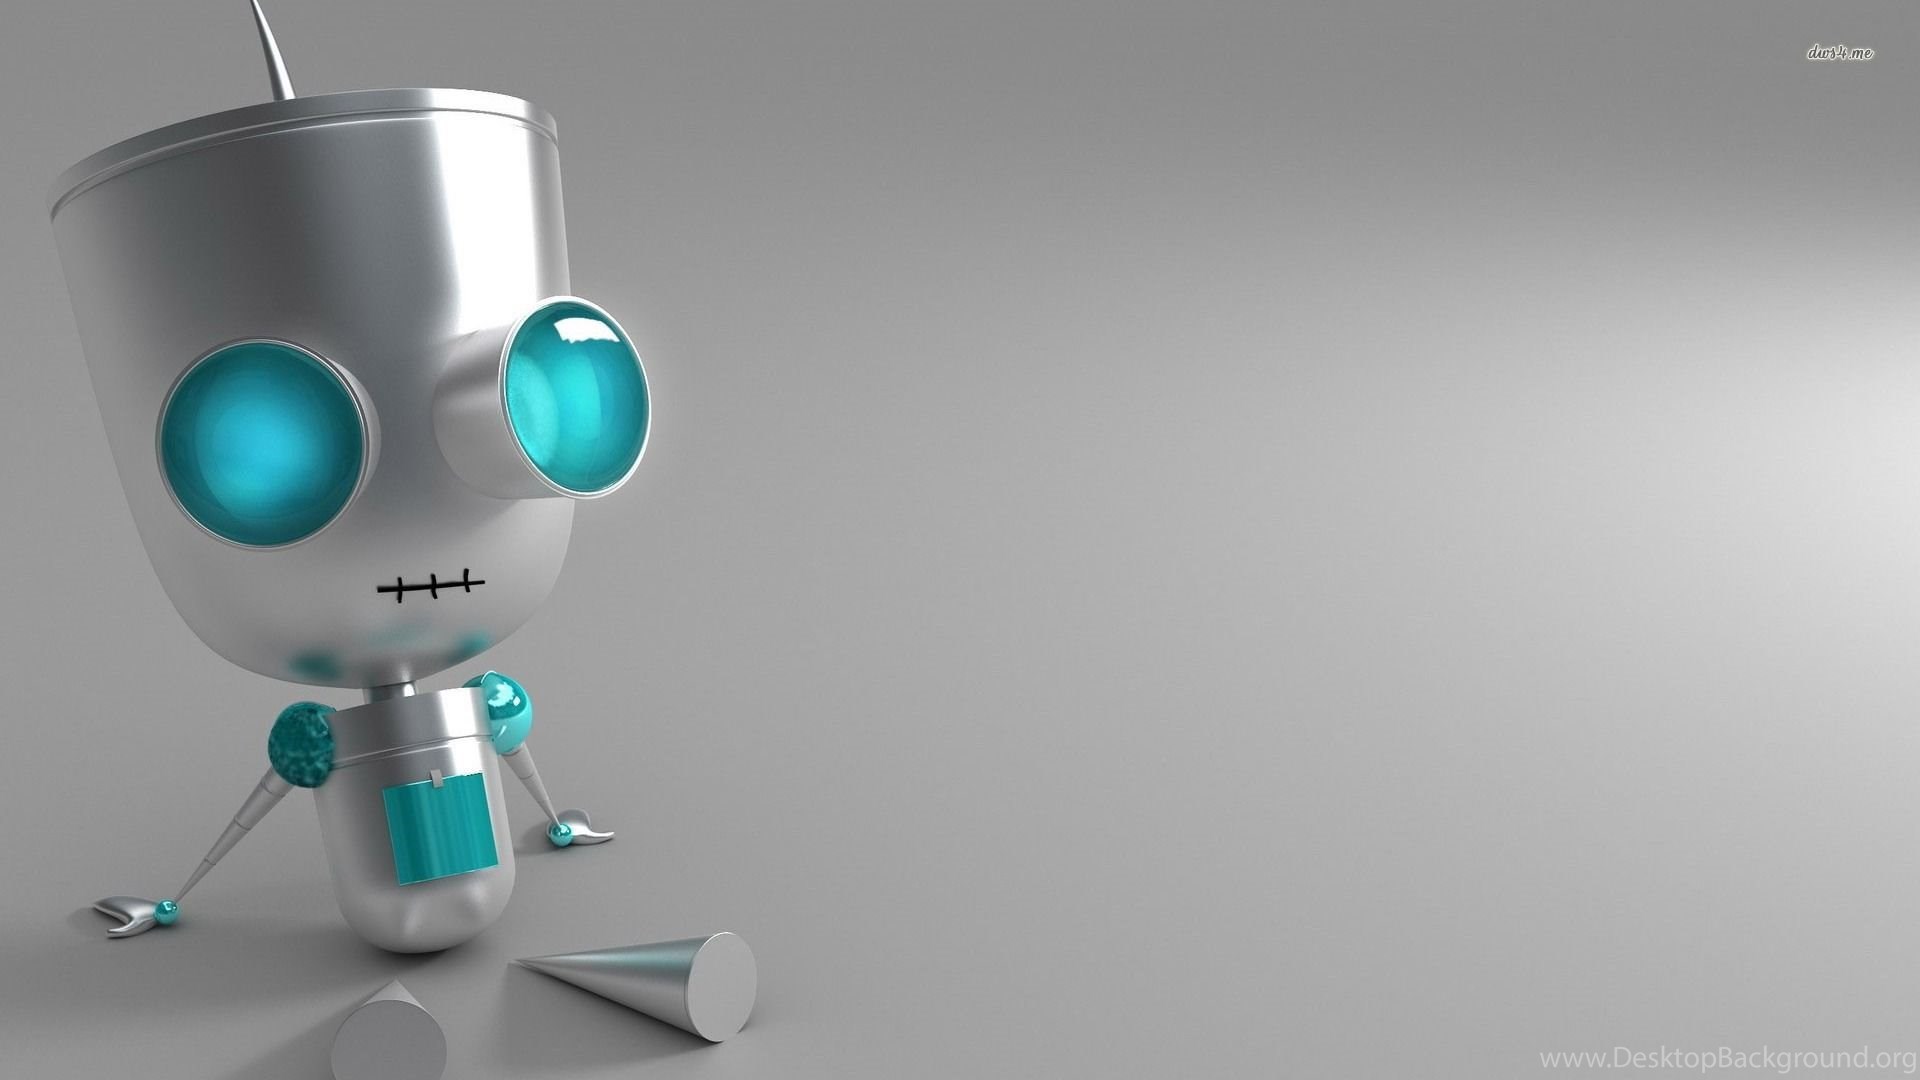 Awesome HD Robot Wallpapers Backgrounds For Free Download Desktop